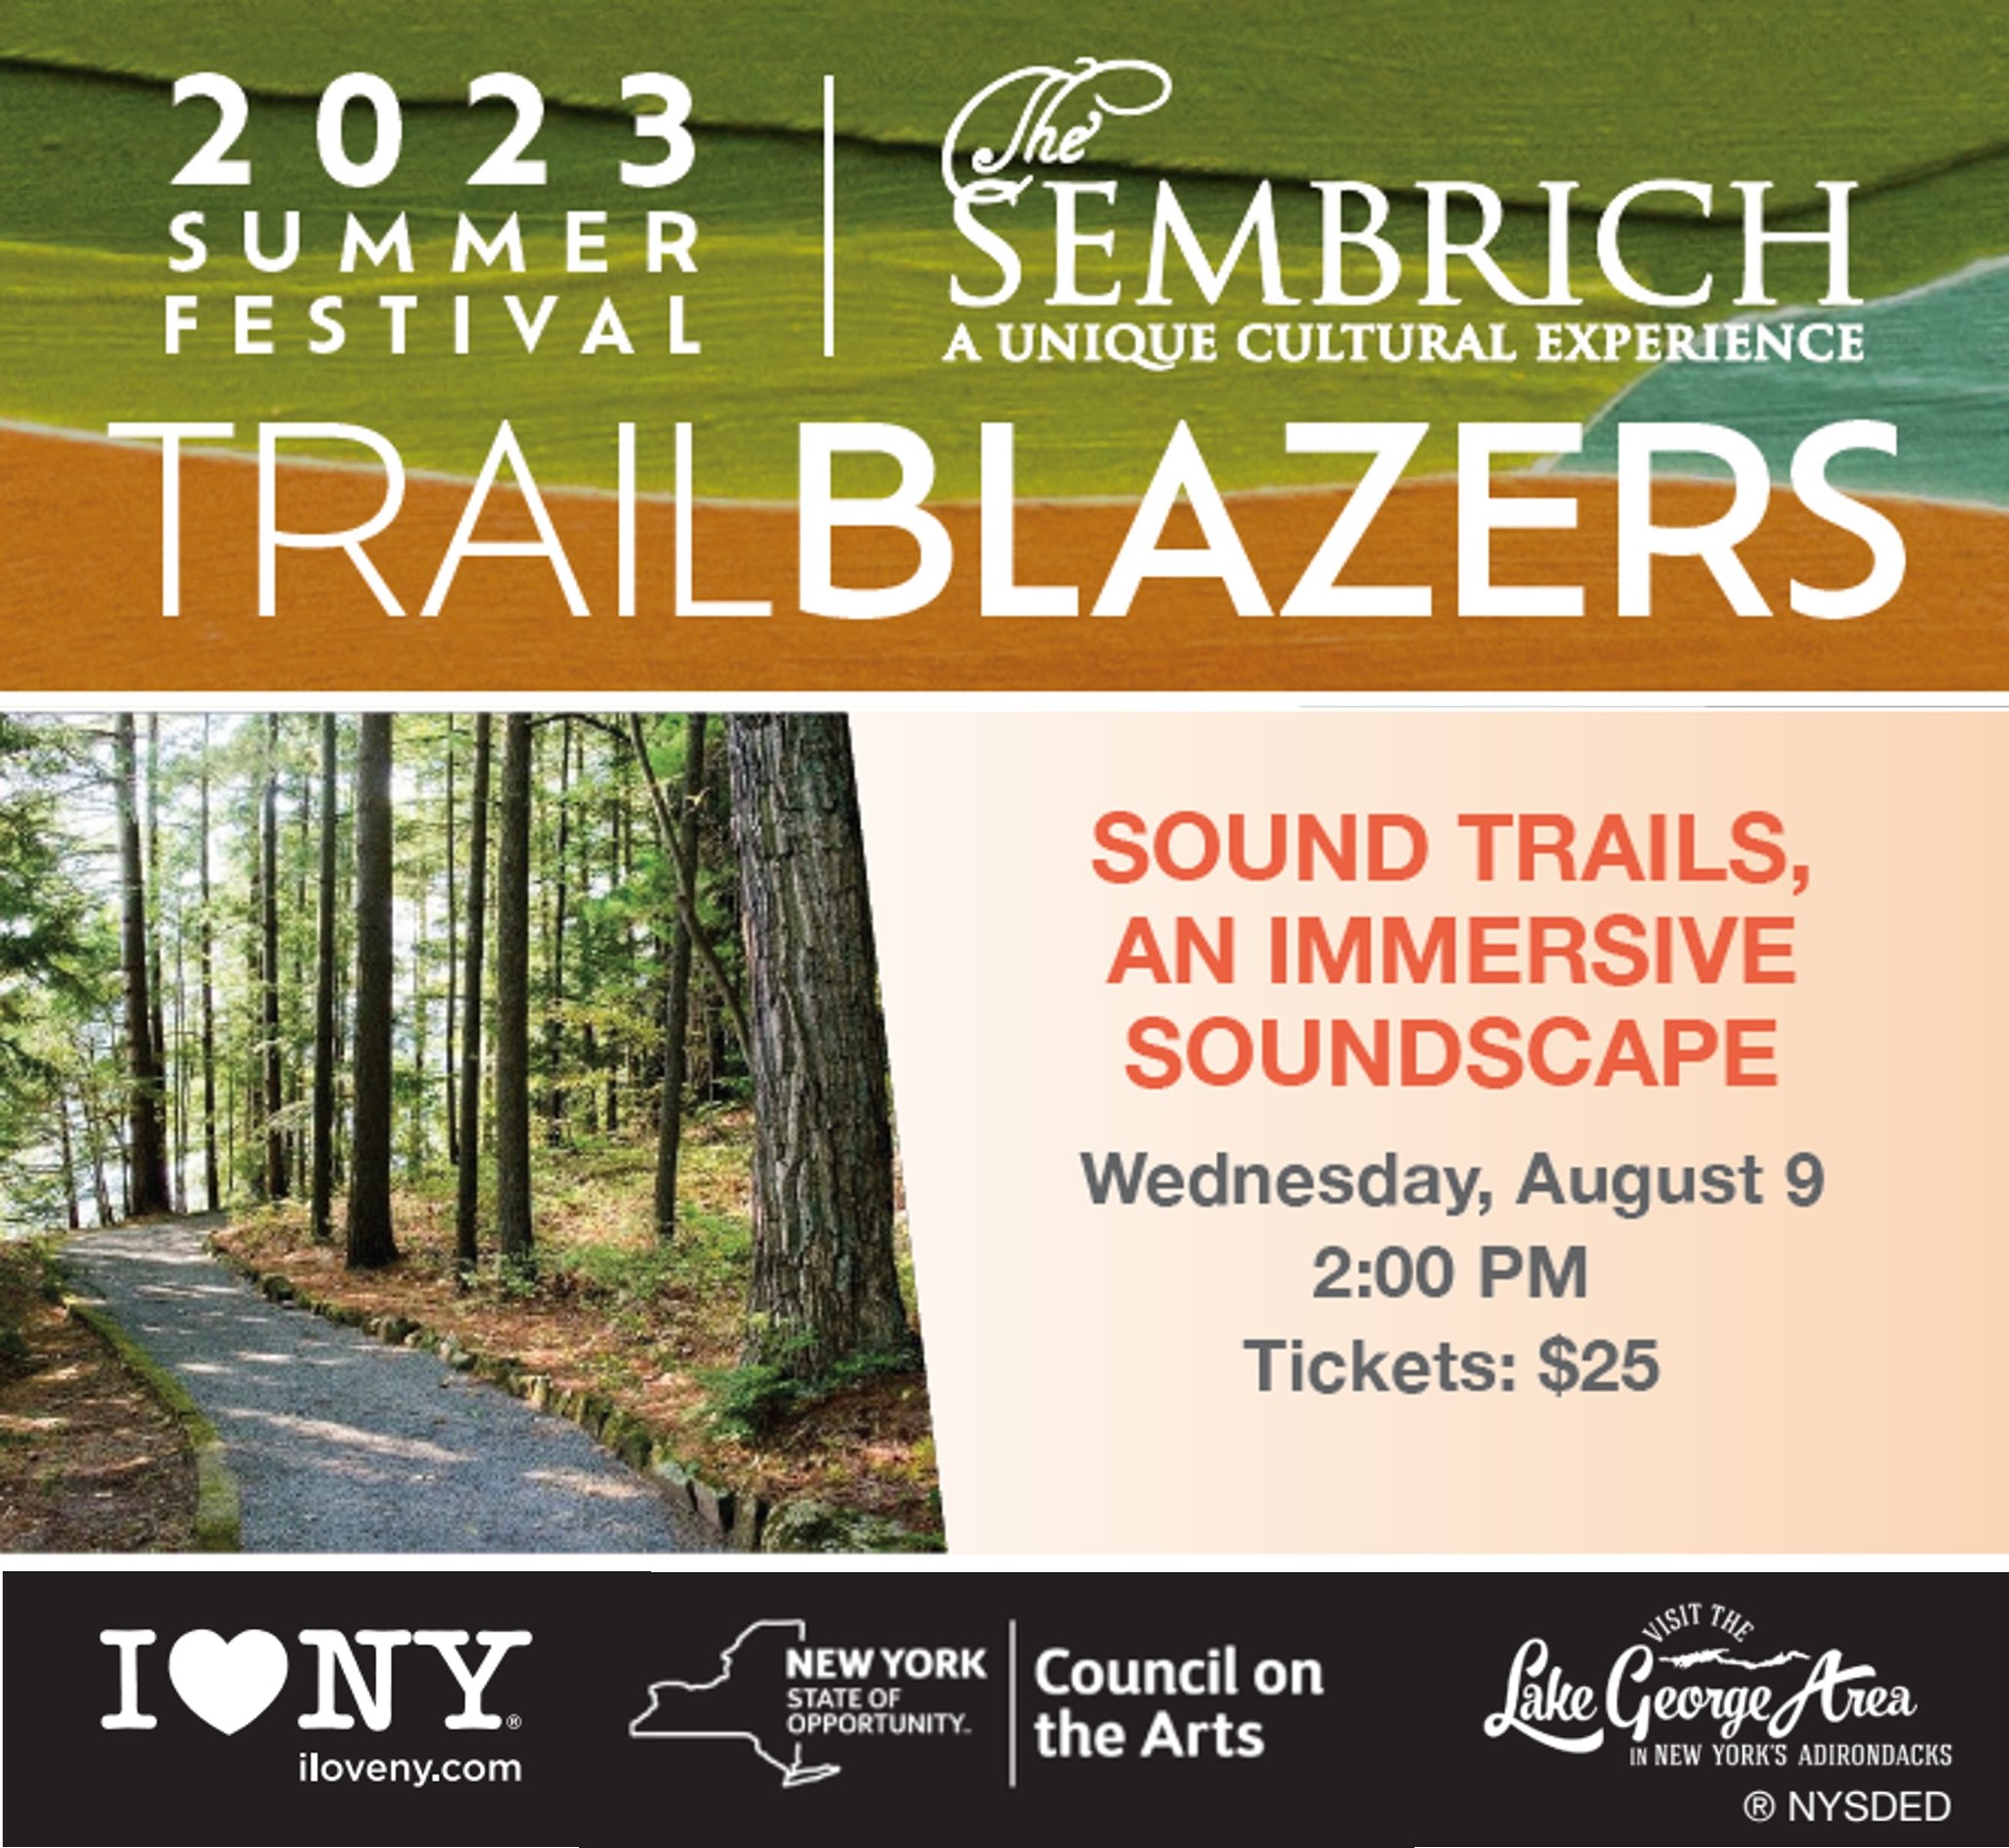 A vibrant poster promotes the 2023 Summer Festival, taking place on Wednesday, August 9th at 2:00 PM.